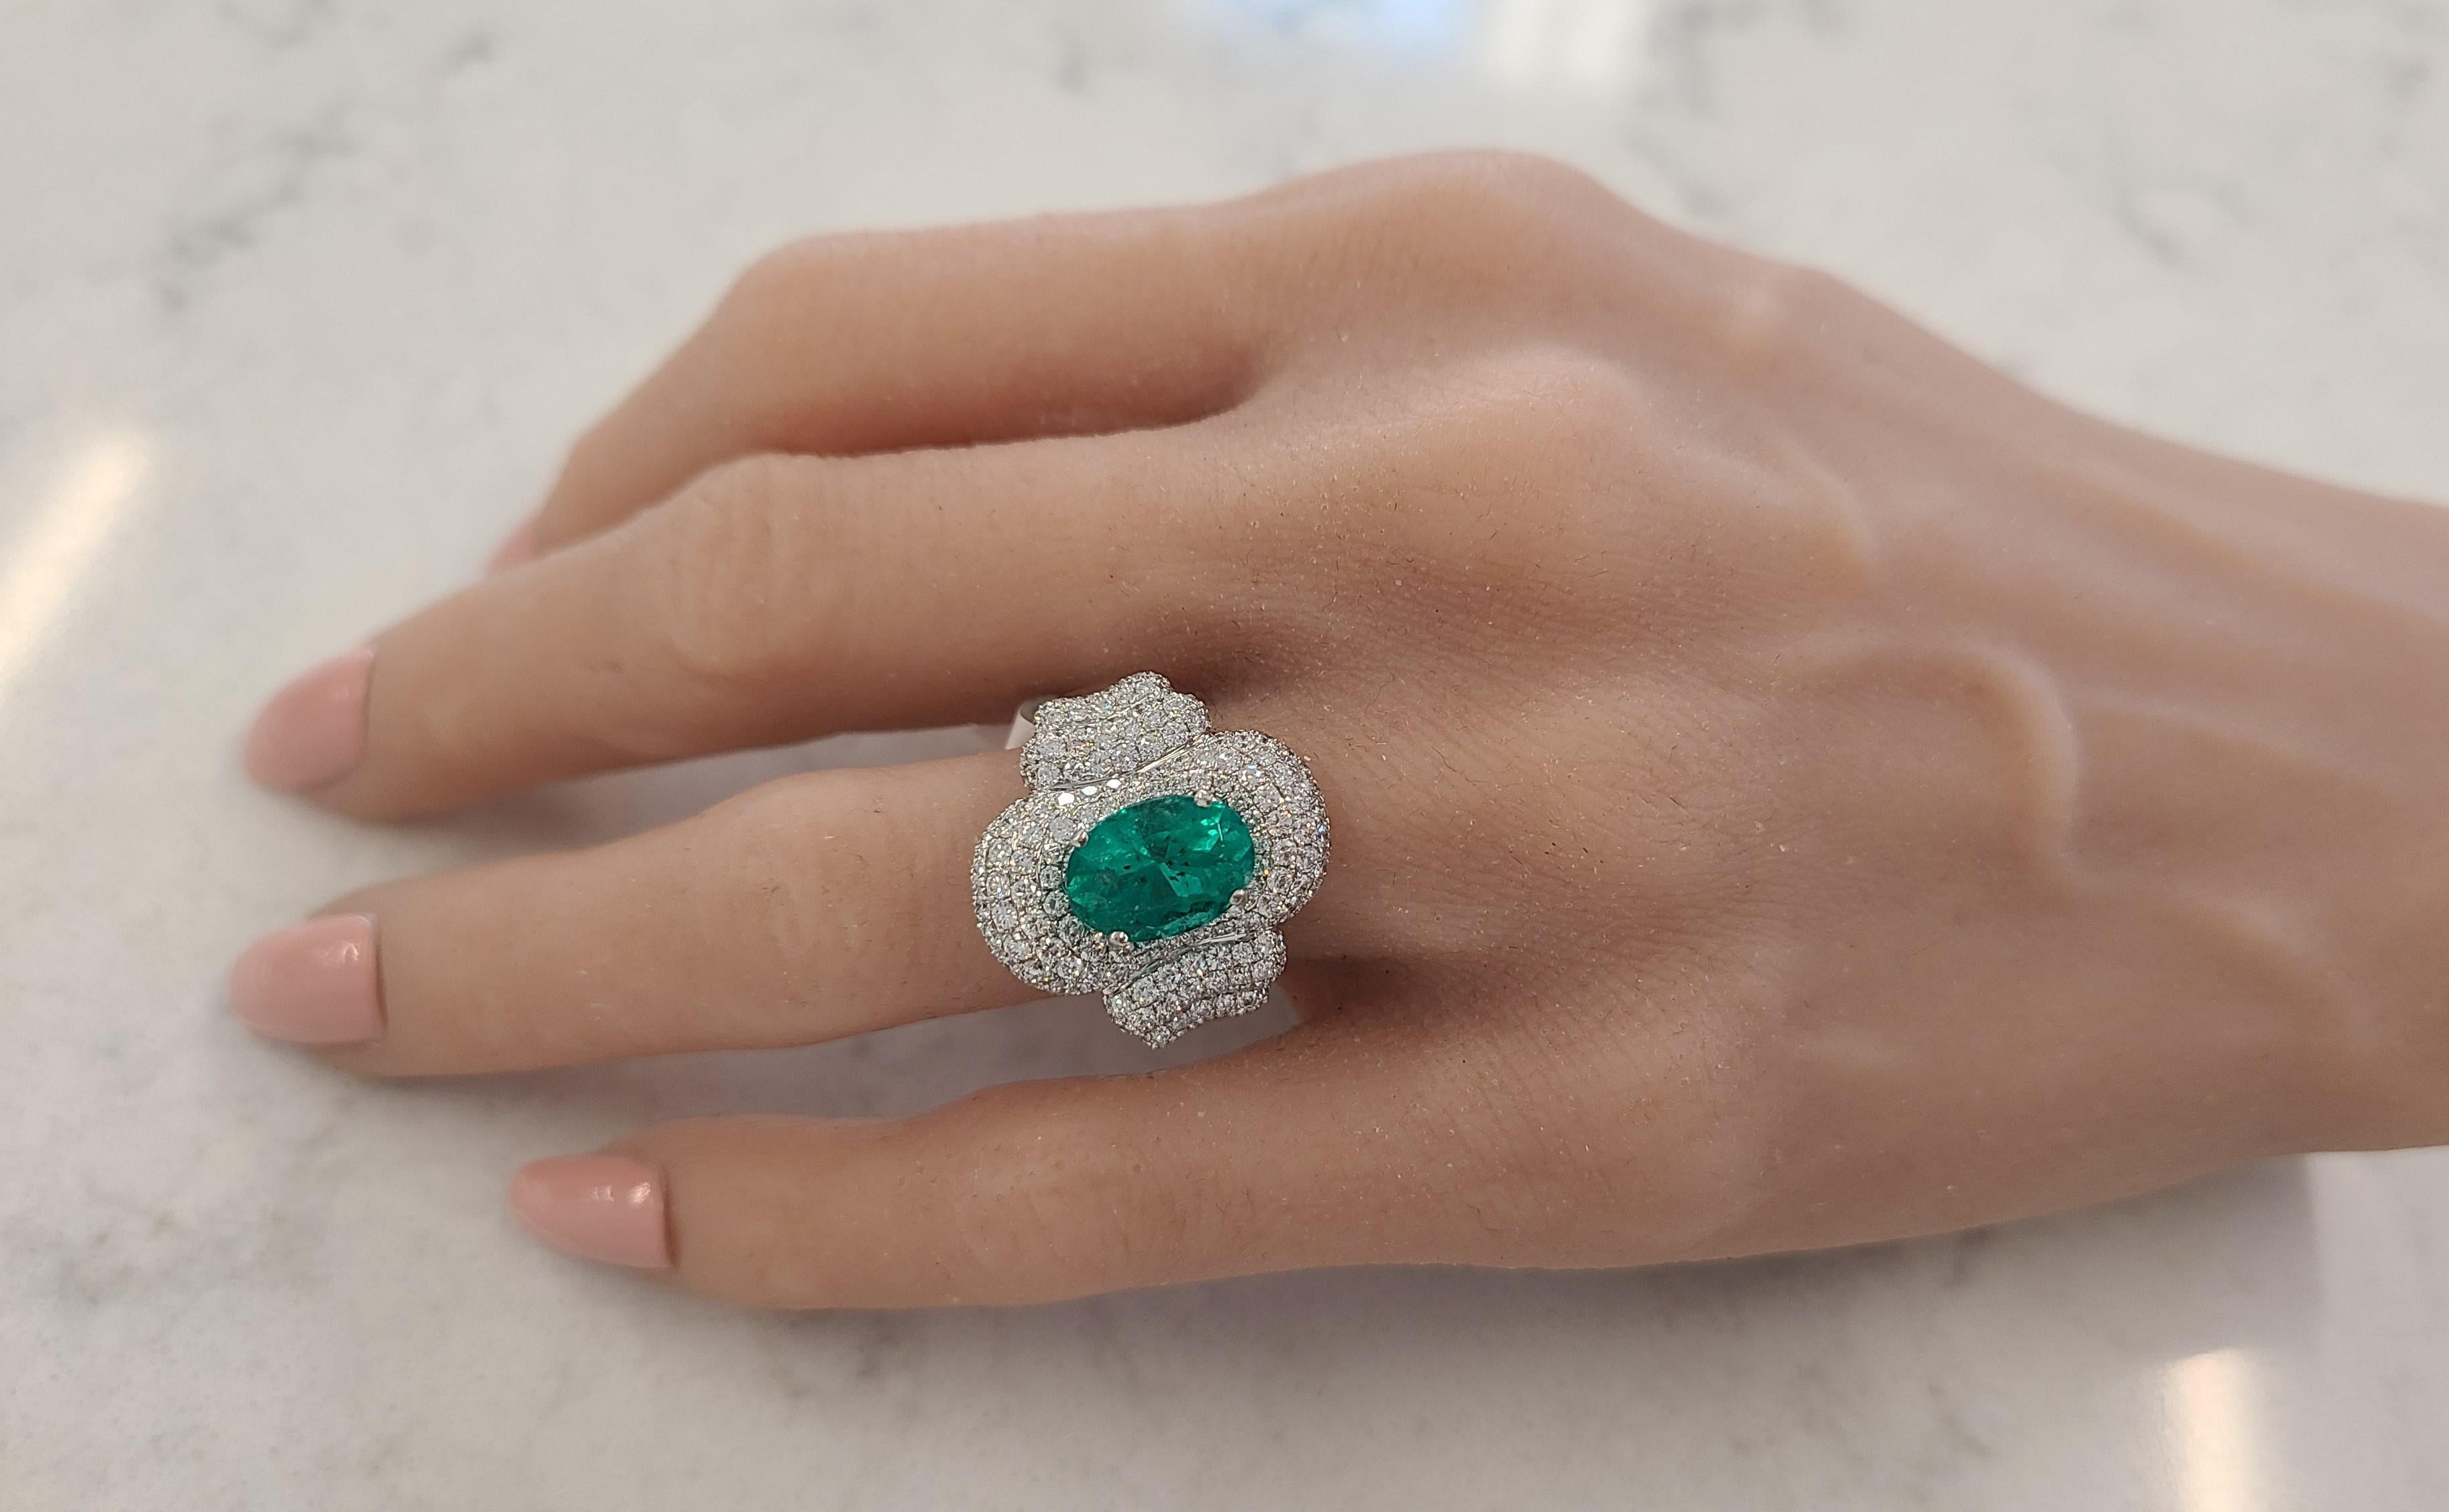 Created in brightly polished 18k white gold, this custom-made emerald and diamond ring is truly one-of-a-kind in sophisticated style. An oval cut emerald sits nestled in a four prong setting with a weight of 2.87 carats and measurements of